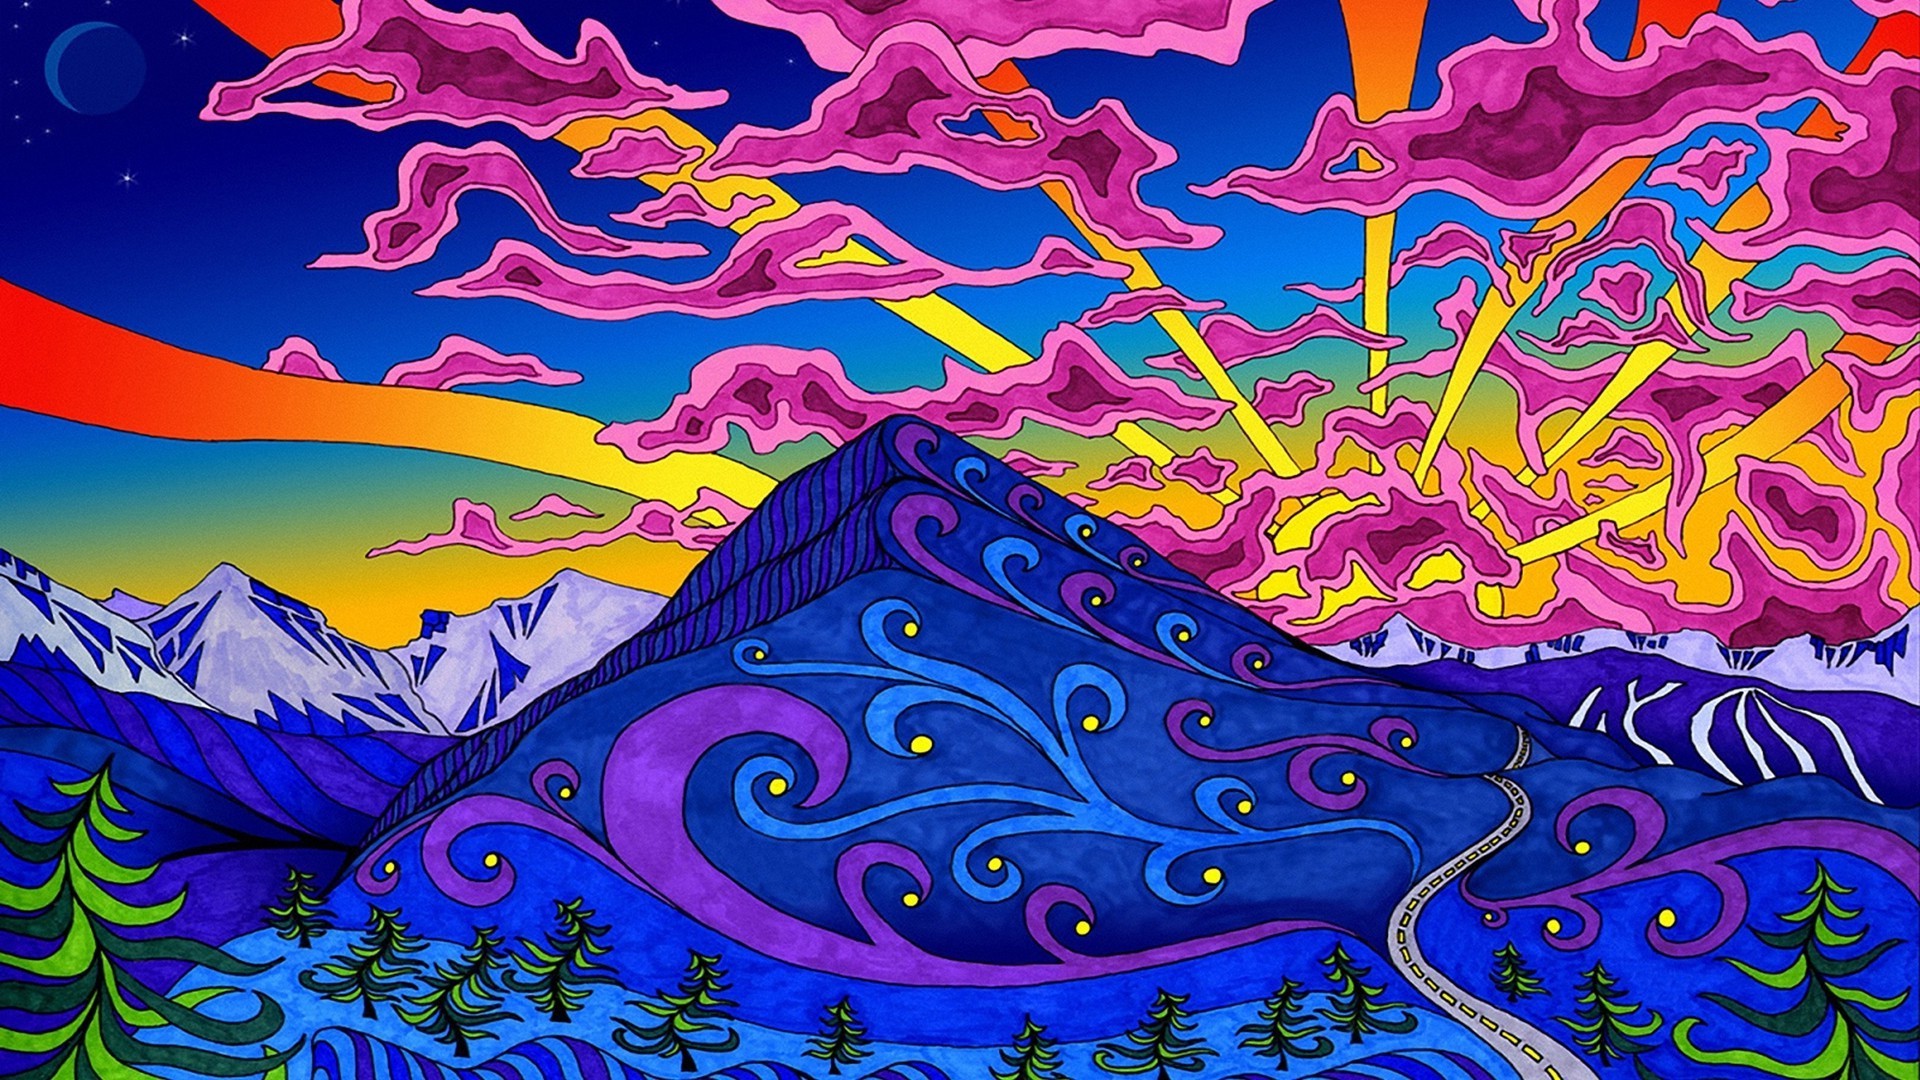 psychedelic, Colorful, Lines, Nature, Mountain, Trees, Snowy Peak, Moon ...